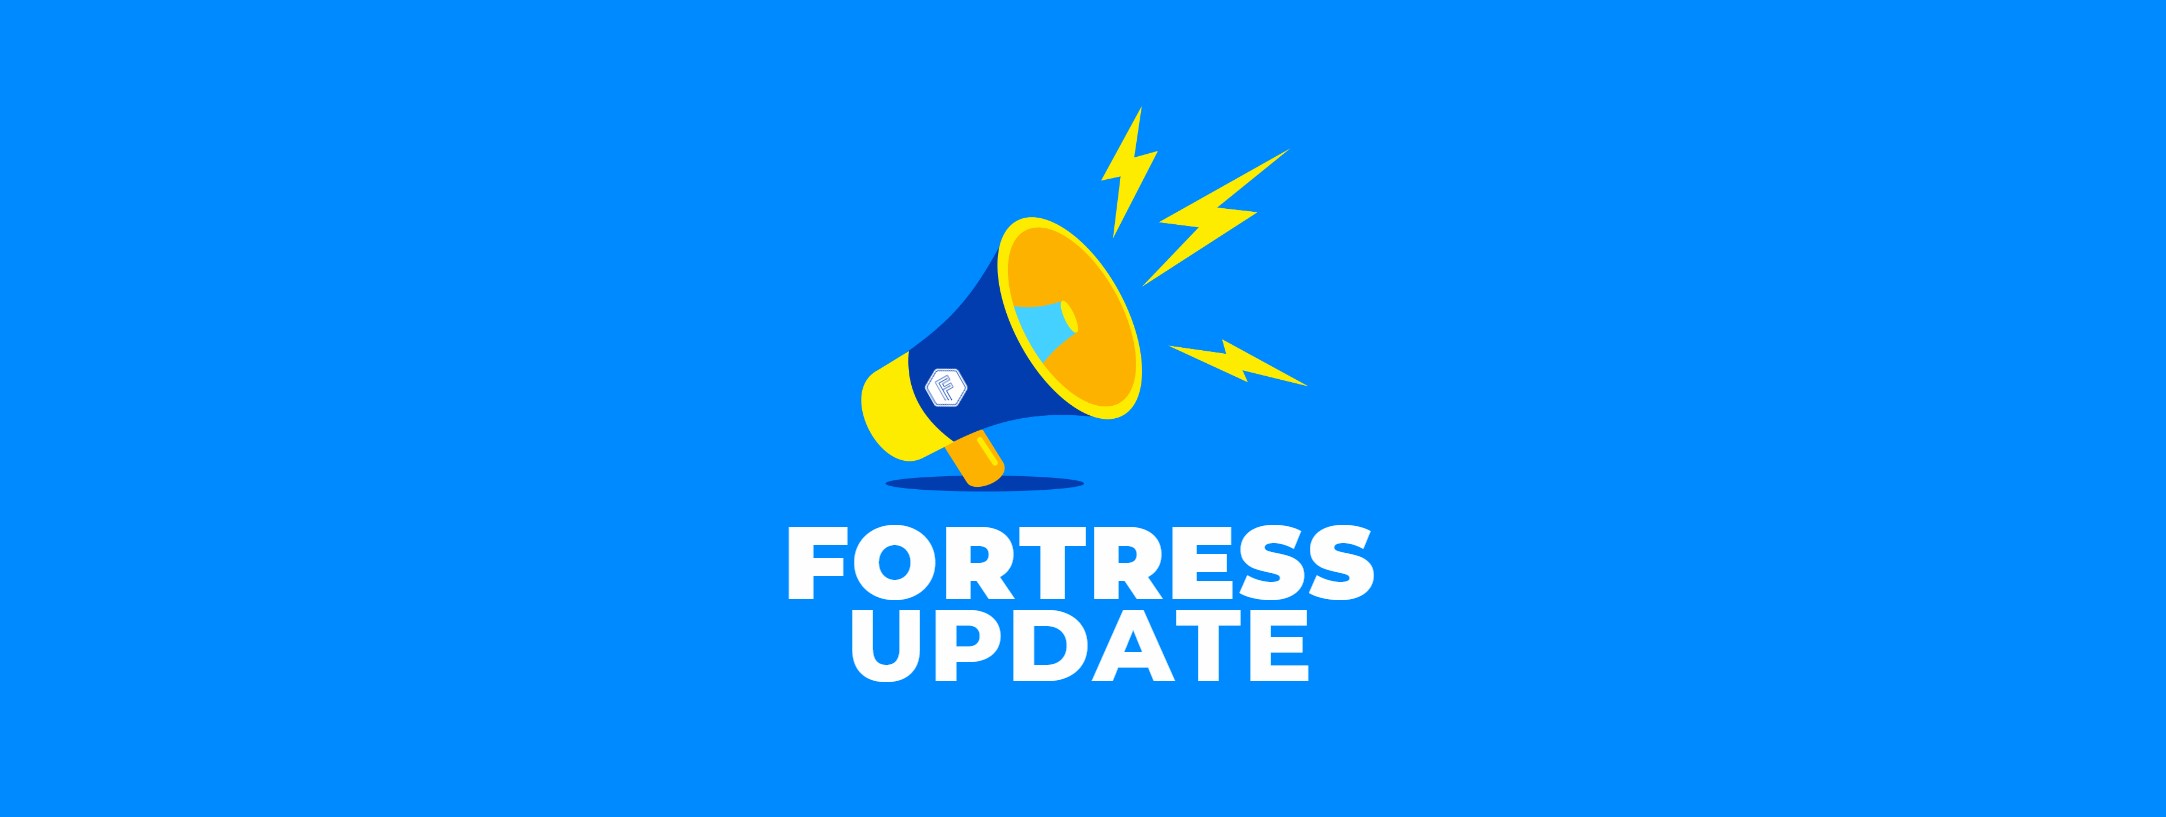 Fortress Company Update